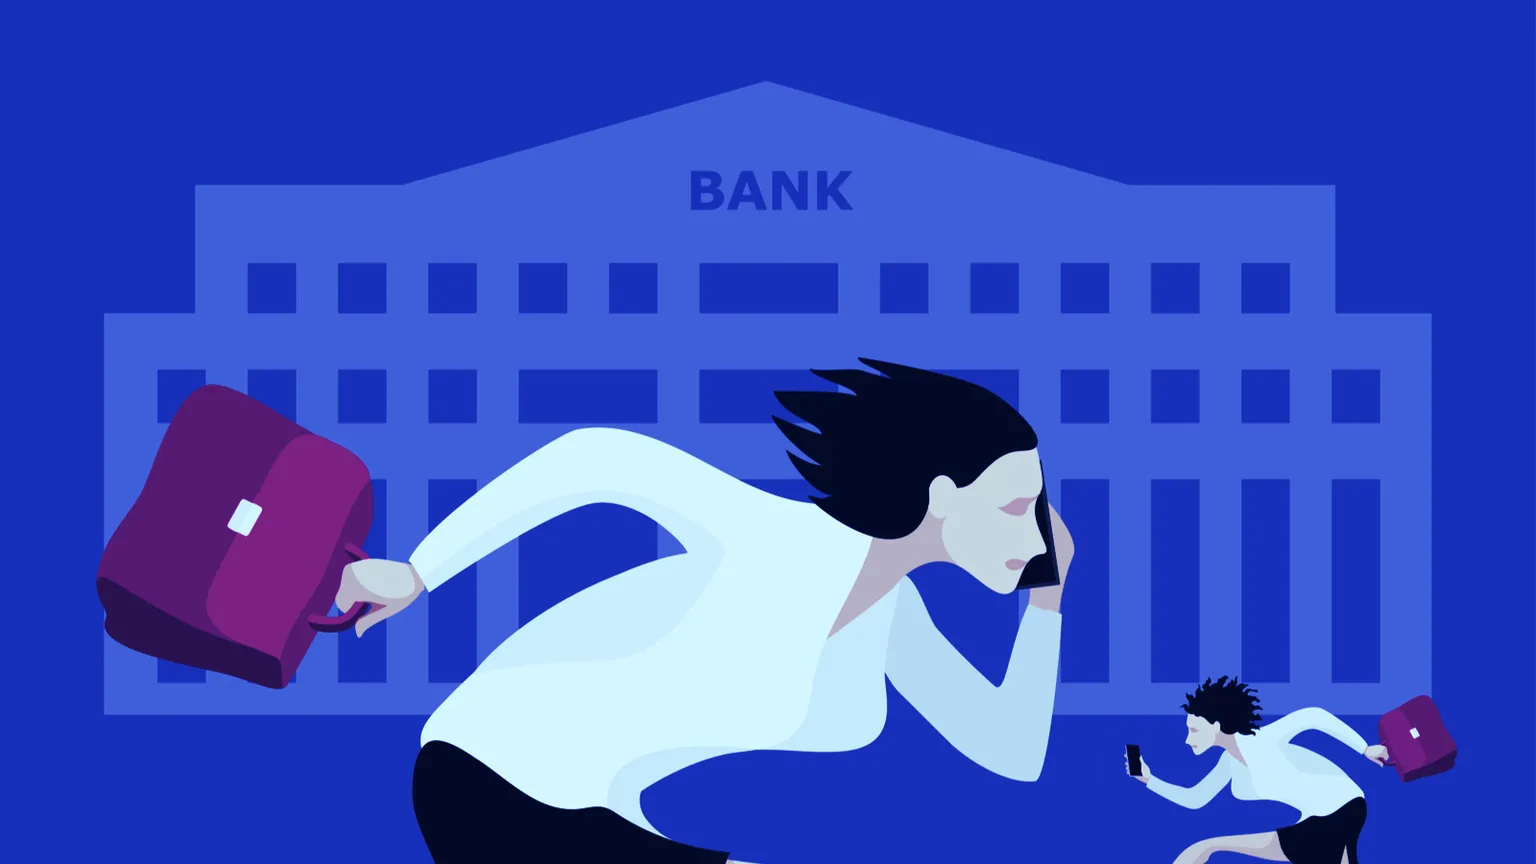 The first bank has fallen amid the economic collapse caused by the coronavirus crisis. Image: Shutterstock.